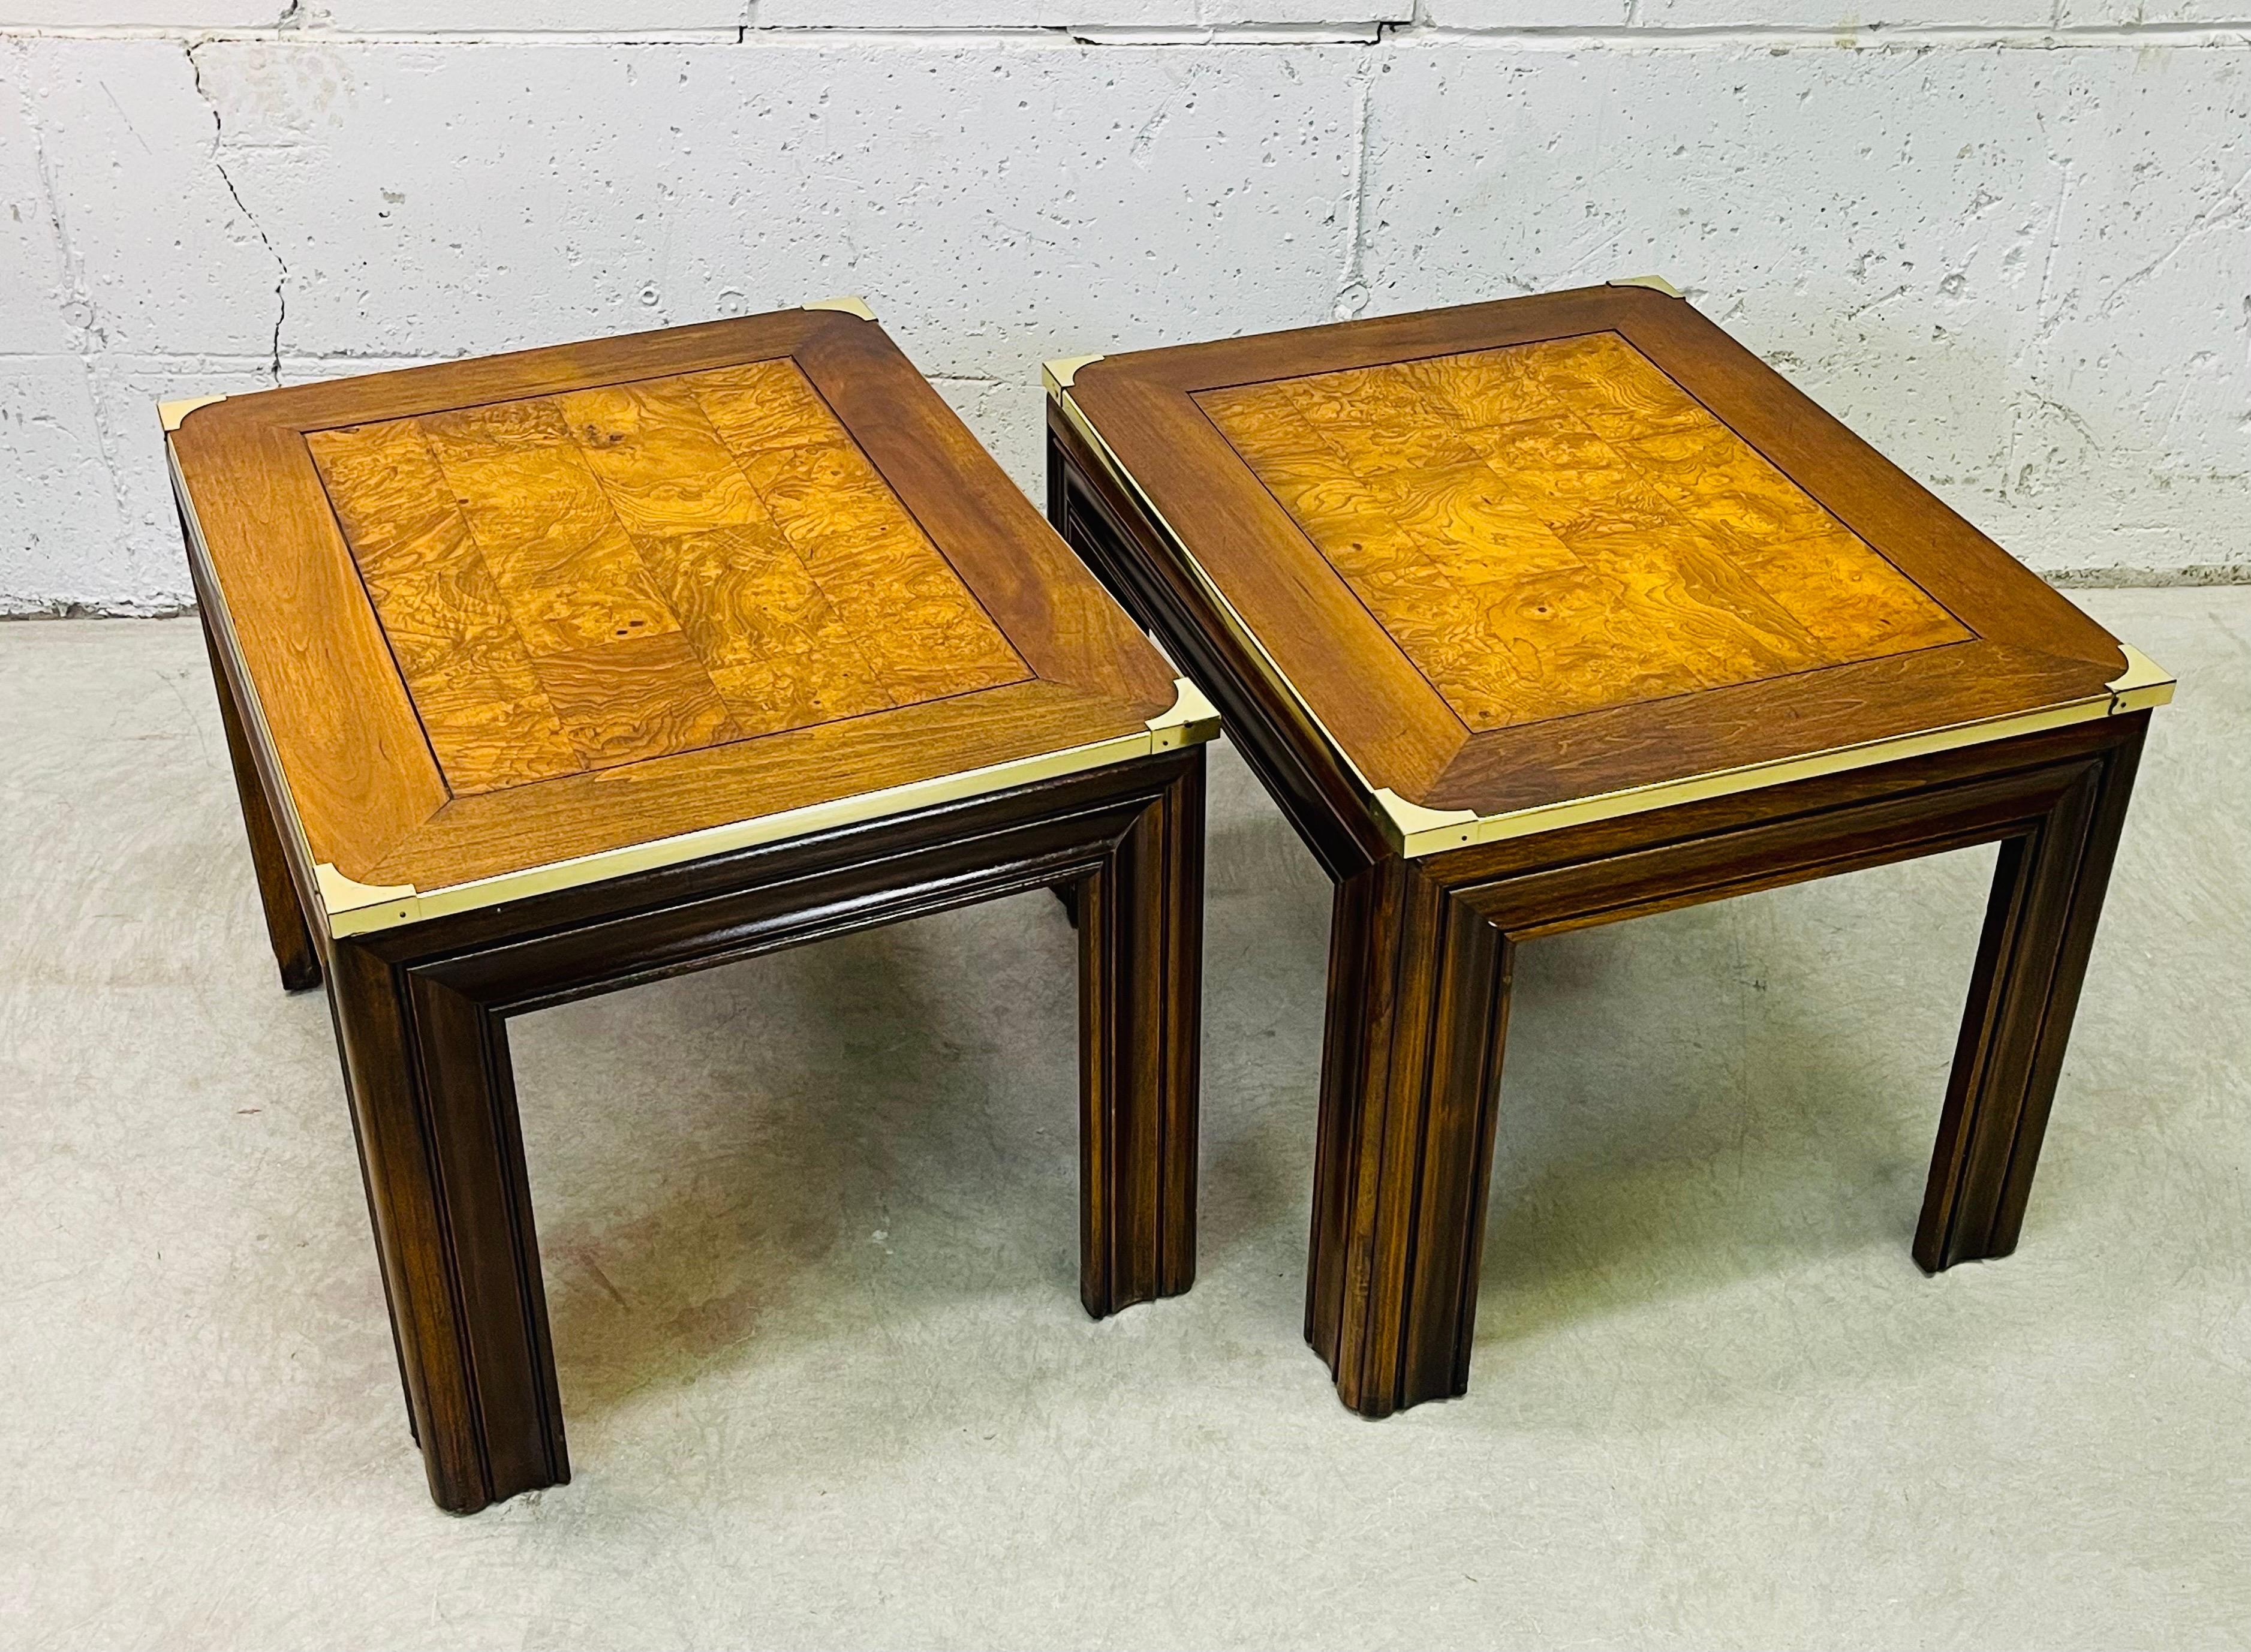 Vintage 1970s pair of rectangular burlwood and brass accented side tables. The tables have large legs and are very sturdy. The burlwood is inset into the top of the table. No marks.